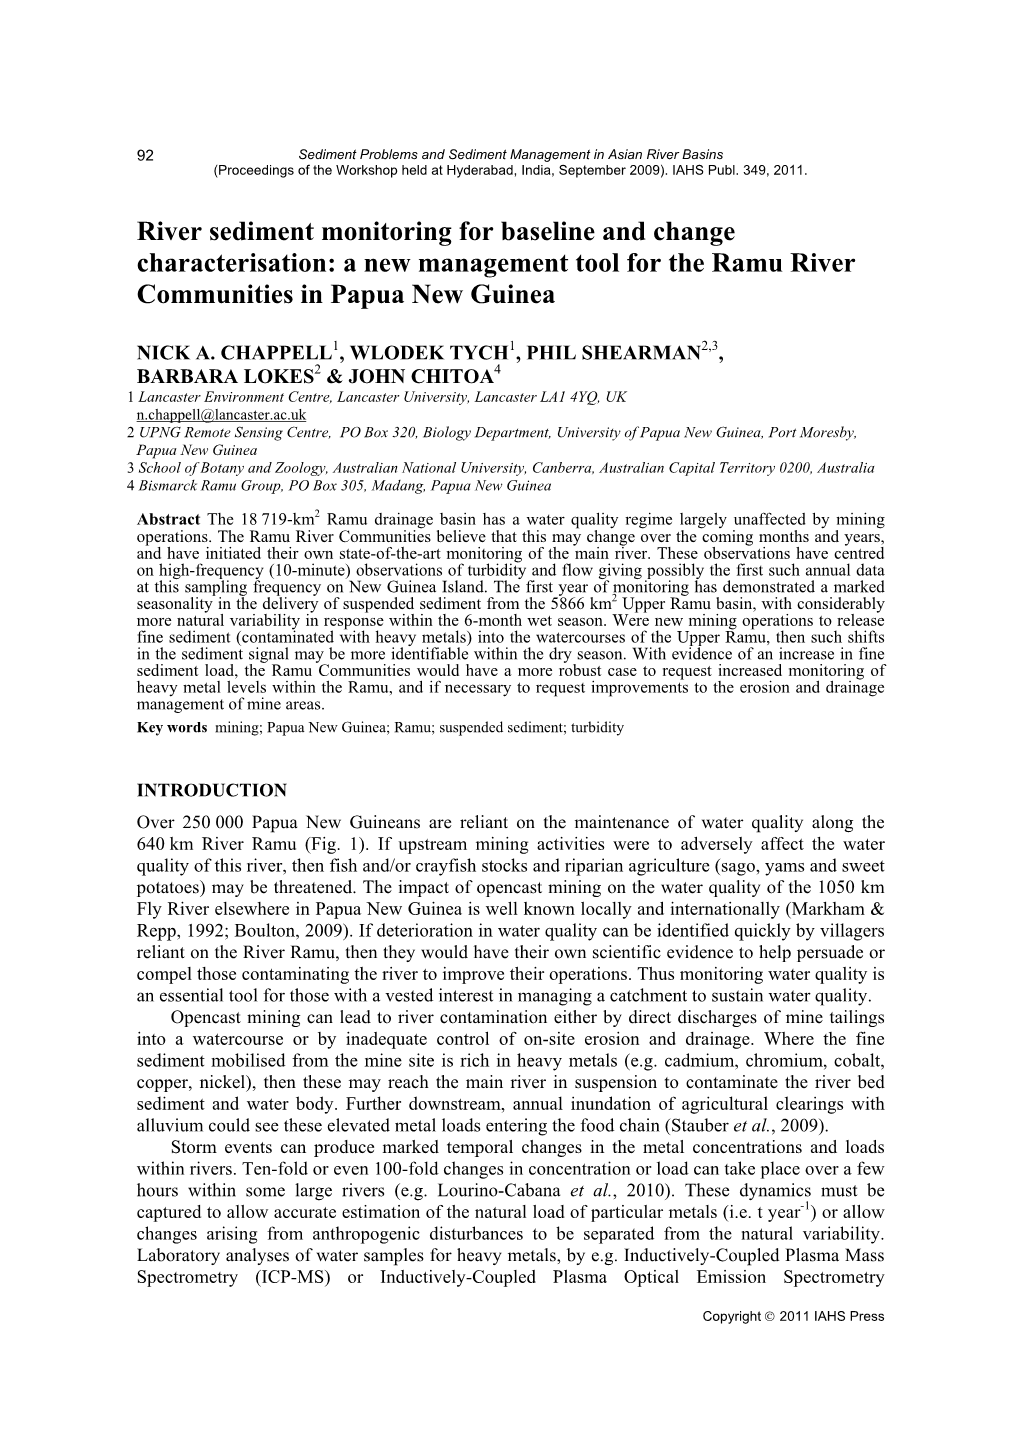 River Sediment Monitoring for Baseline and Change Characterisation: a New Management Tool for the Ramu River Communities in Papua New Guinea